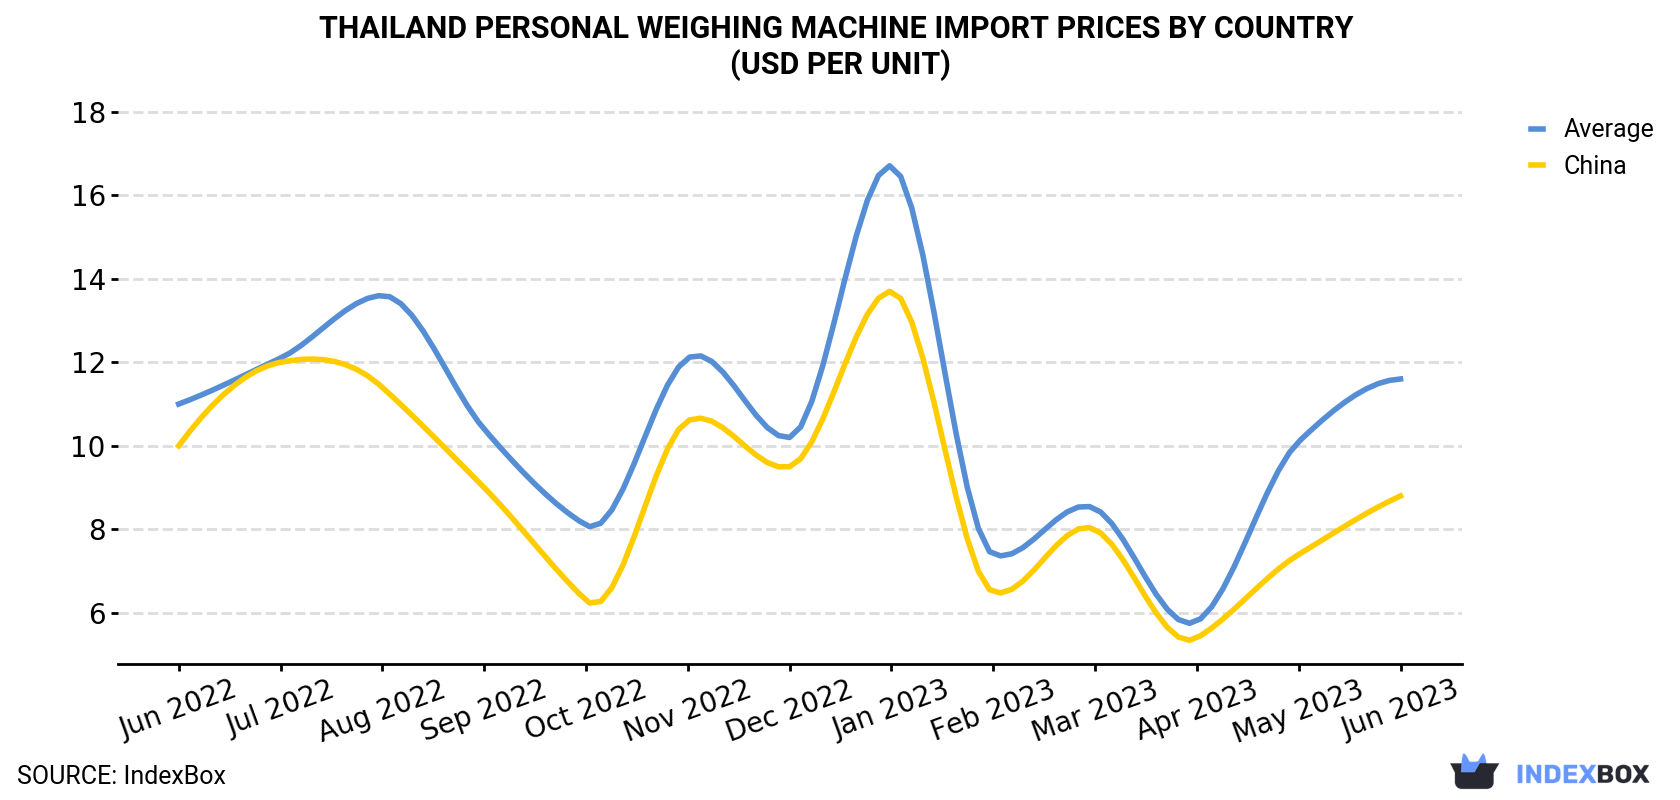 Thailand Personal Weighing Machine Import Prices By Country (USD Per Unit)